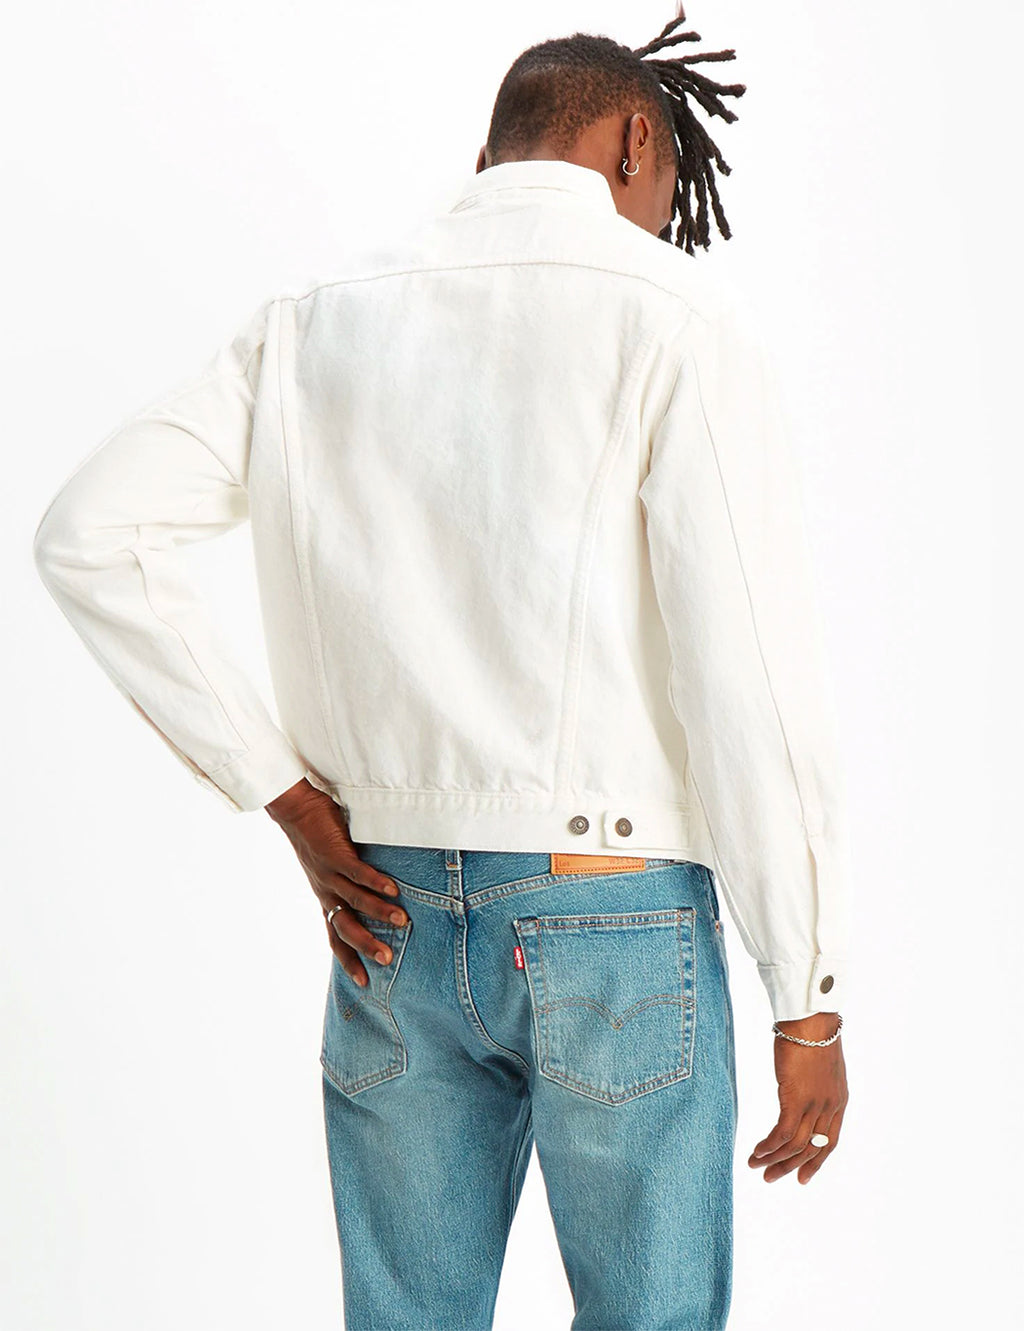 Levis Vintage Fit Trucker Jacket - White Out I URBAN EXCESS.